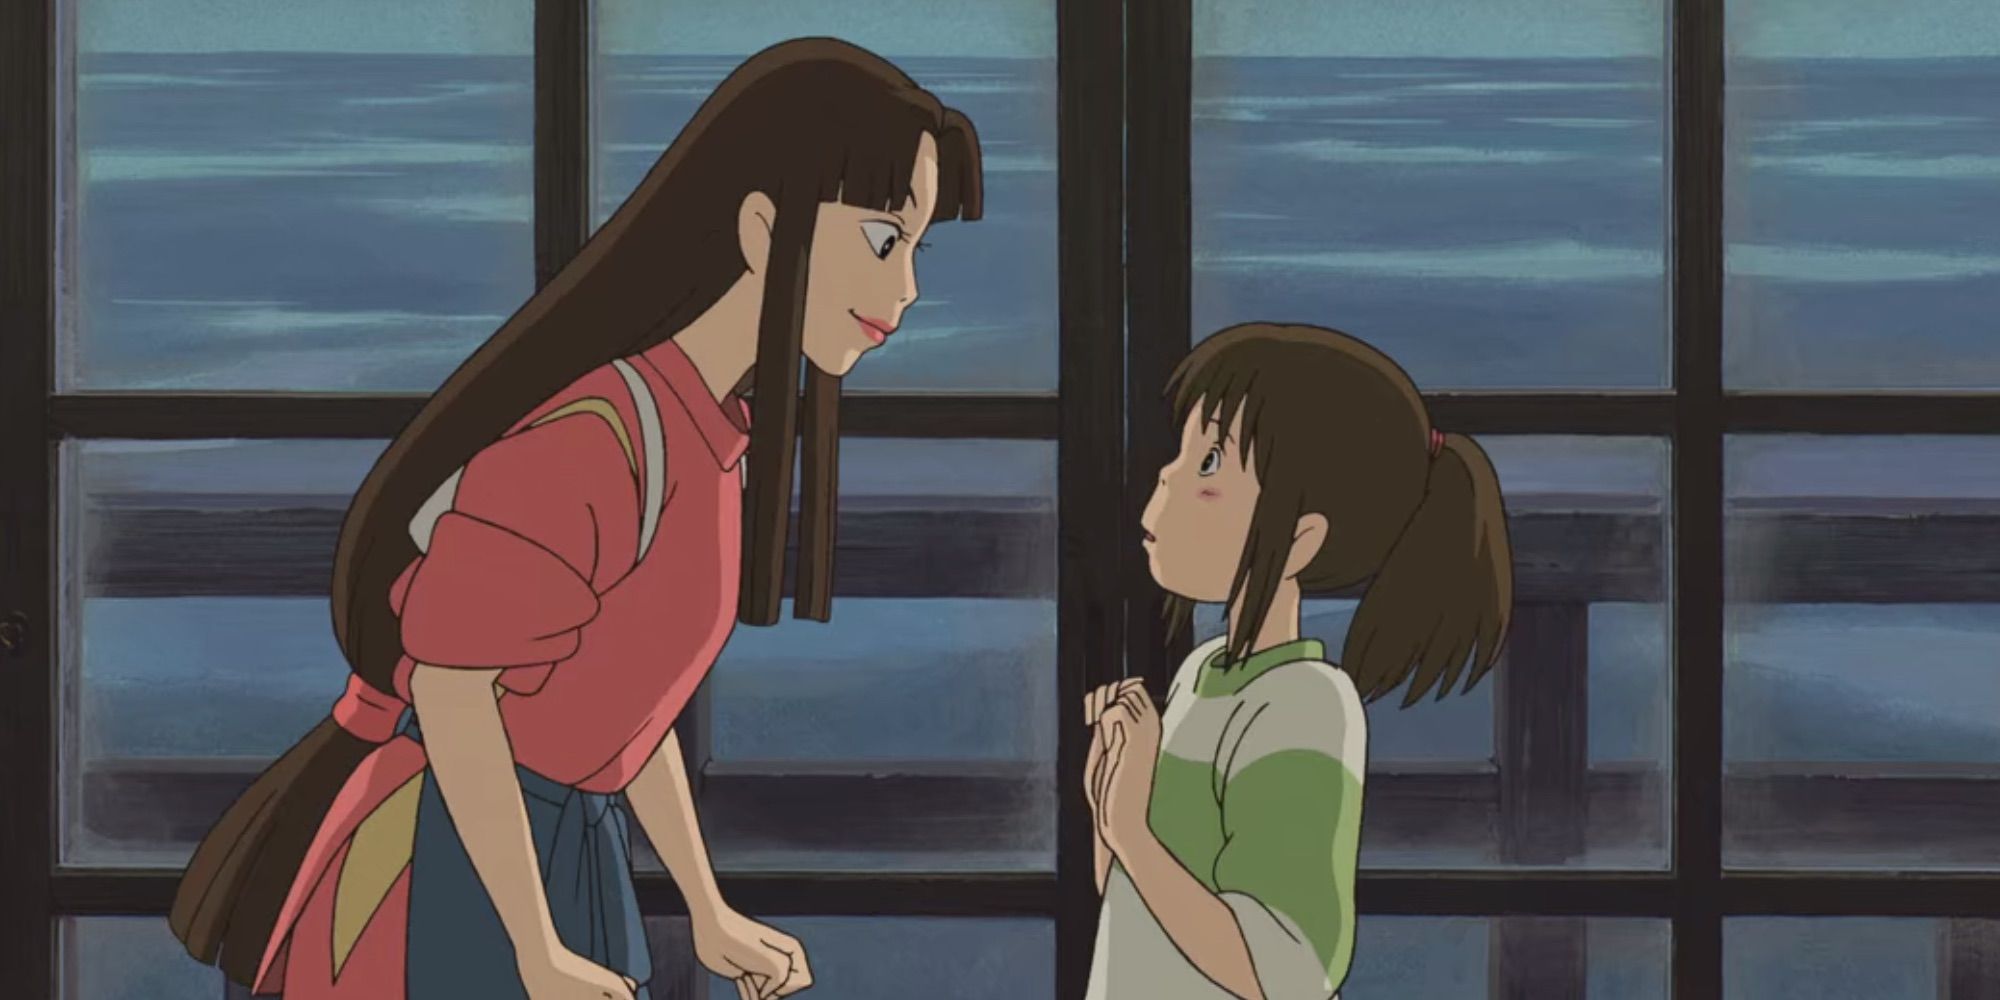 Lin and Chihiro talking in Spirited Away